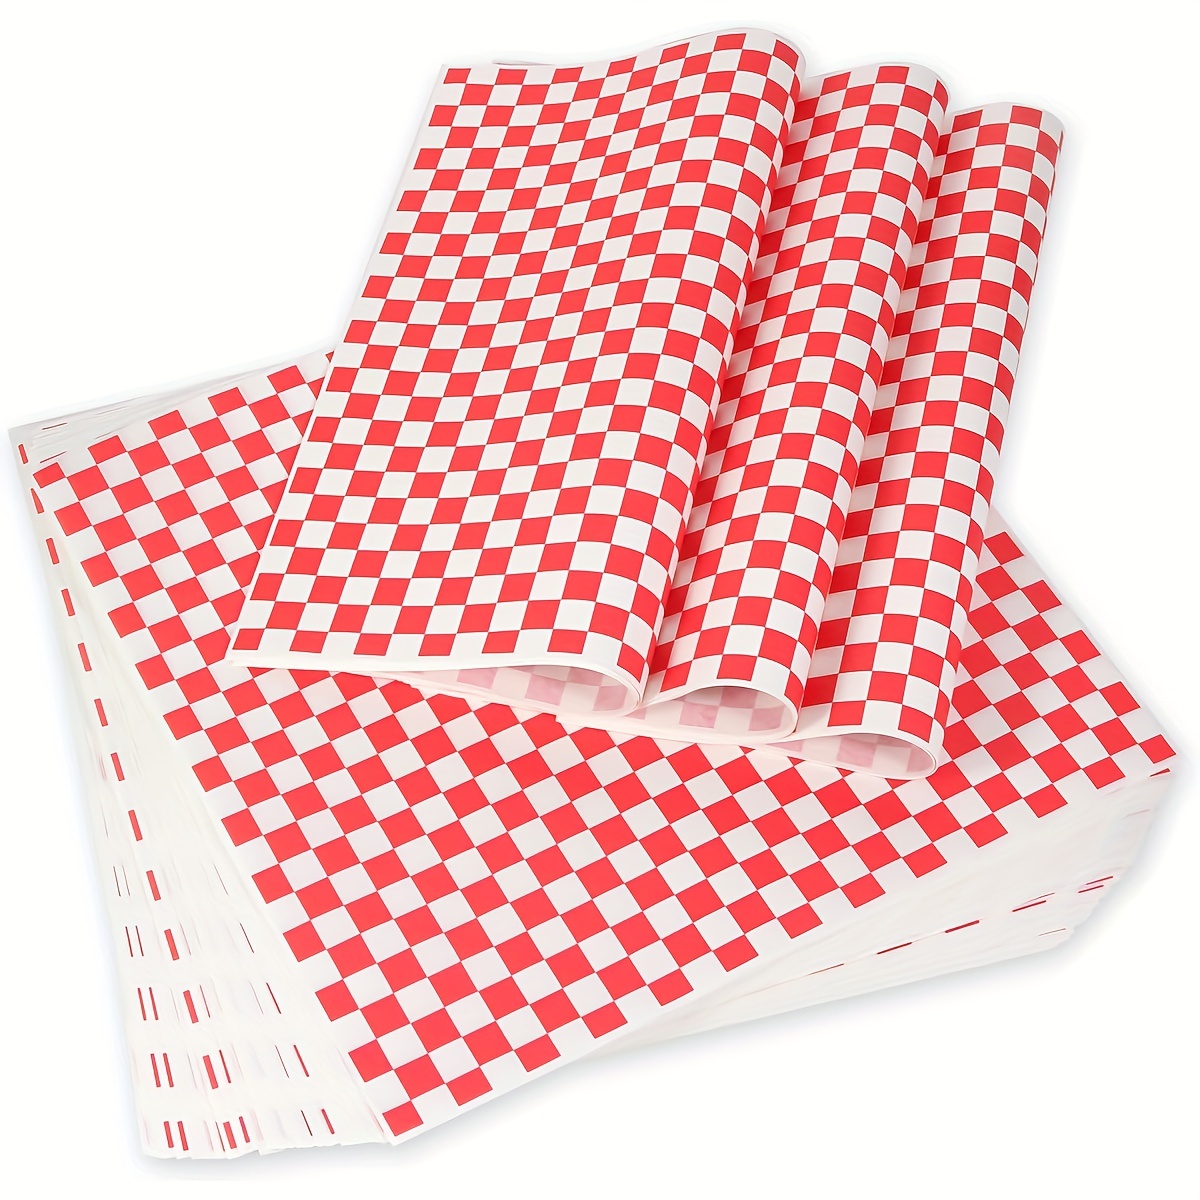 Deli Paper Sheets Sandwich Wrap Paper - 12x12 Food Wrapping Grease  Resistant Checkered Liner Papers, Perfect for Restaurants, Barbecues,  Picnics